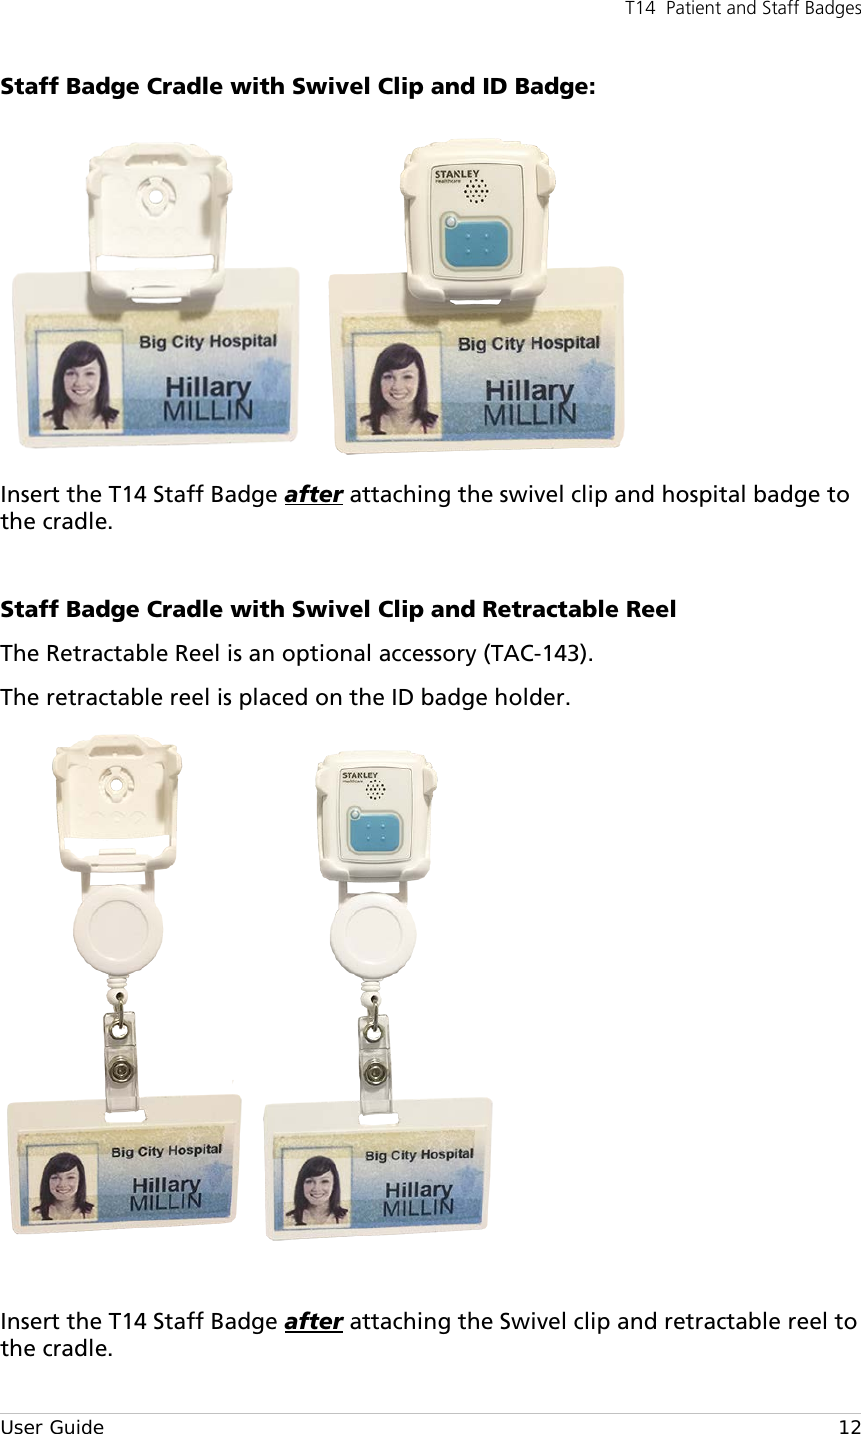 T14  Patient and Staff Badges  User Guide    12 Staff Badge Cradle with Swivel Clip and ID Badge:  Insert the T14 Staff Badge after attaching the swivel clip and hospital badge to the cradle.  Staff Badge Cradle with Swivel Clip and Retractable Reel The Retractable Reel is an optional accessory (TAC-143). The retractable reel is placed on the ID badge holder.   Insert the T14 Staff Badge after attaching the Swivel clip and retractable reel to the cradle. 